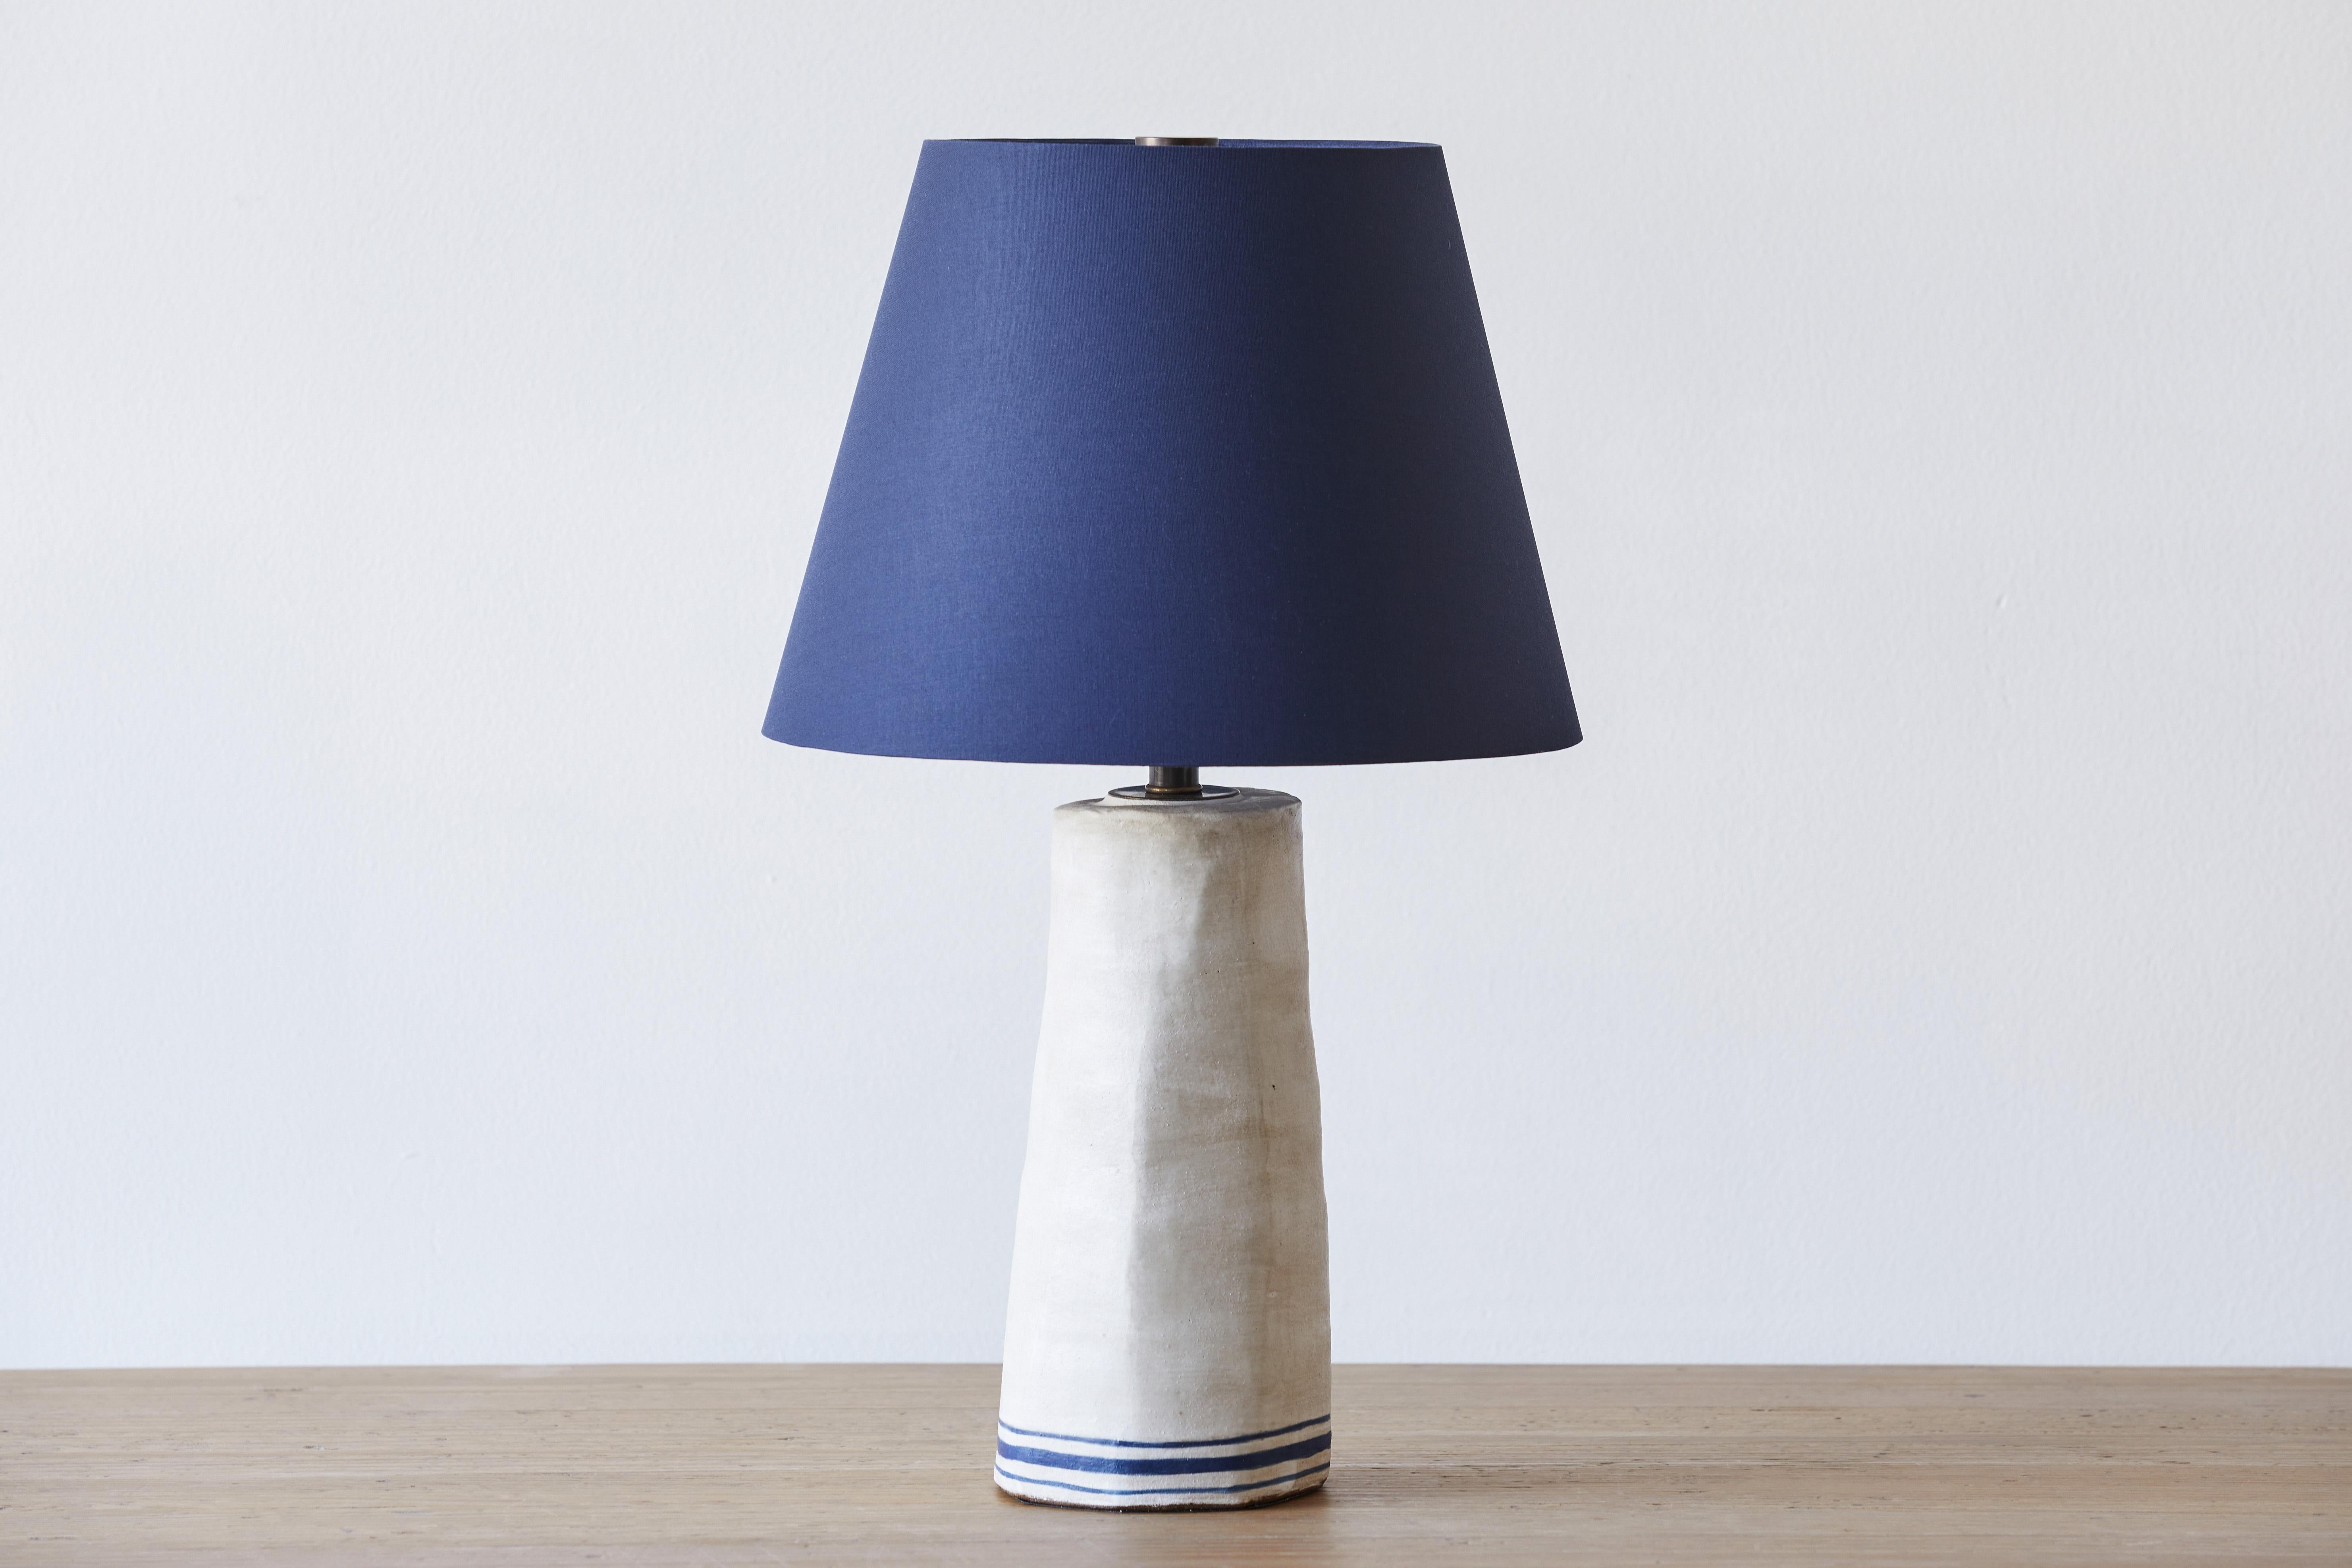 Alix Soubiran Palo table lamp with a custom Navy Bookcloth Shade.

Handmade ceramic lamp bases by the French American artist Alix Soubiran. The lamps come with brown twist cord.